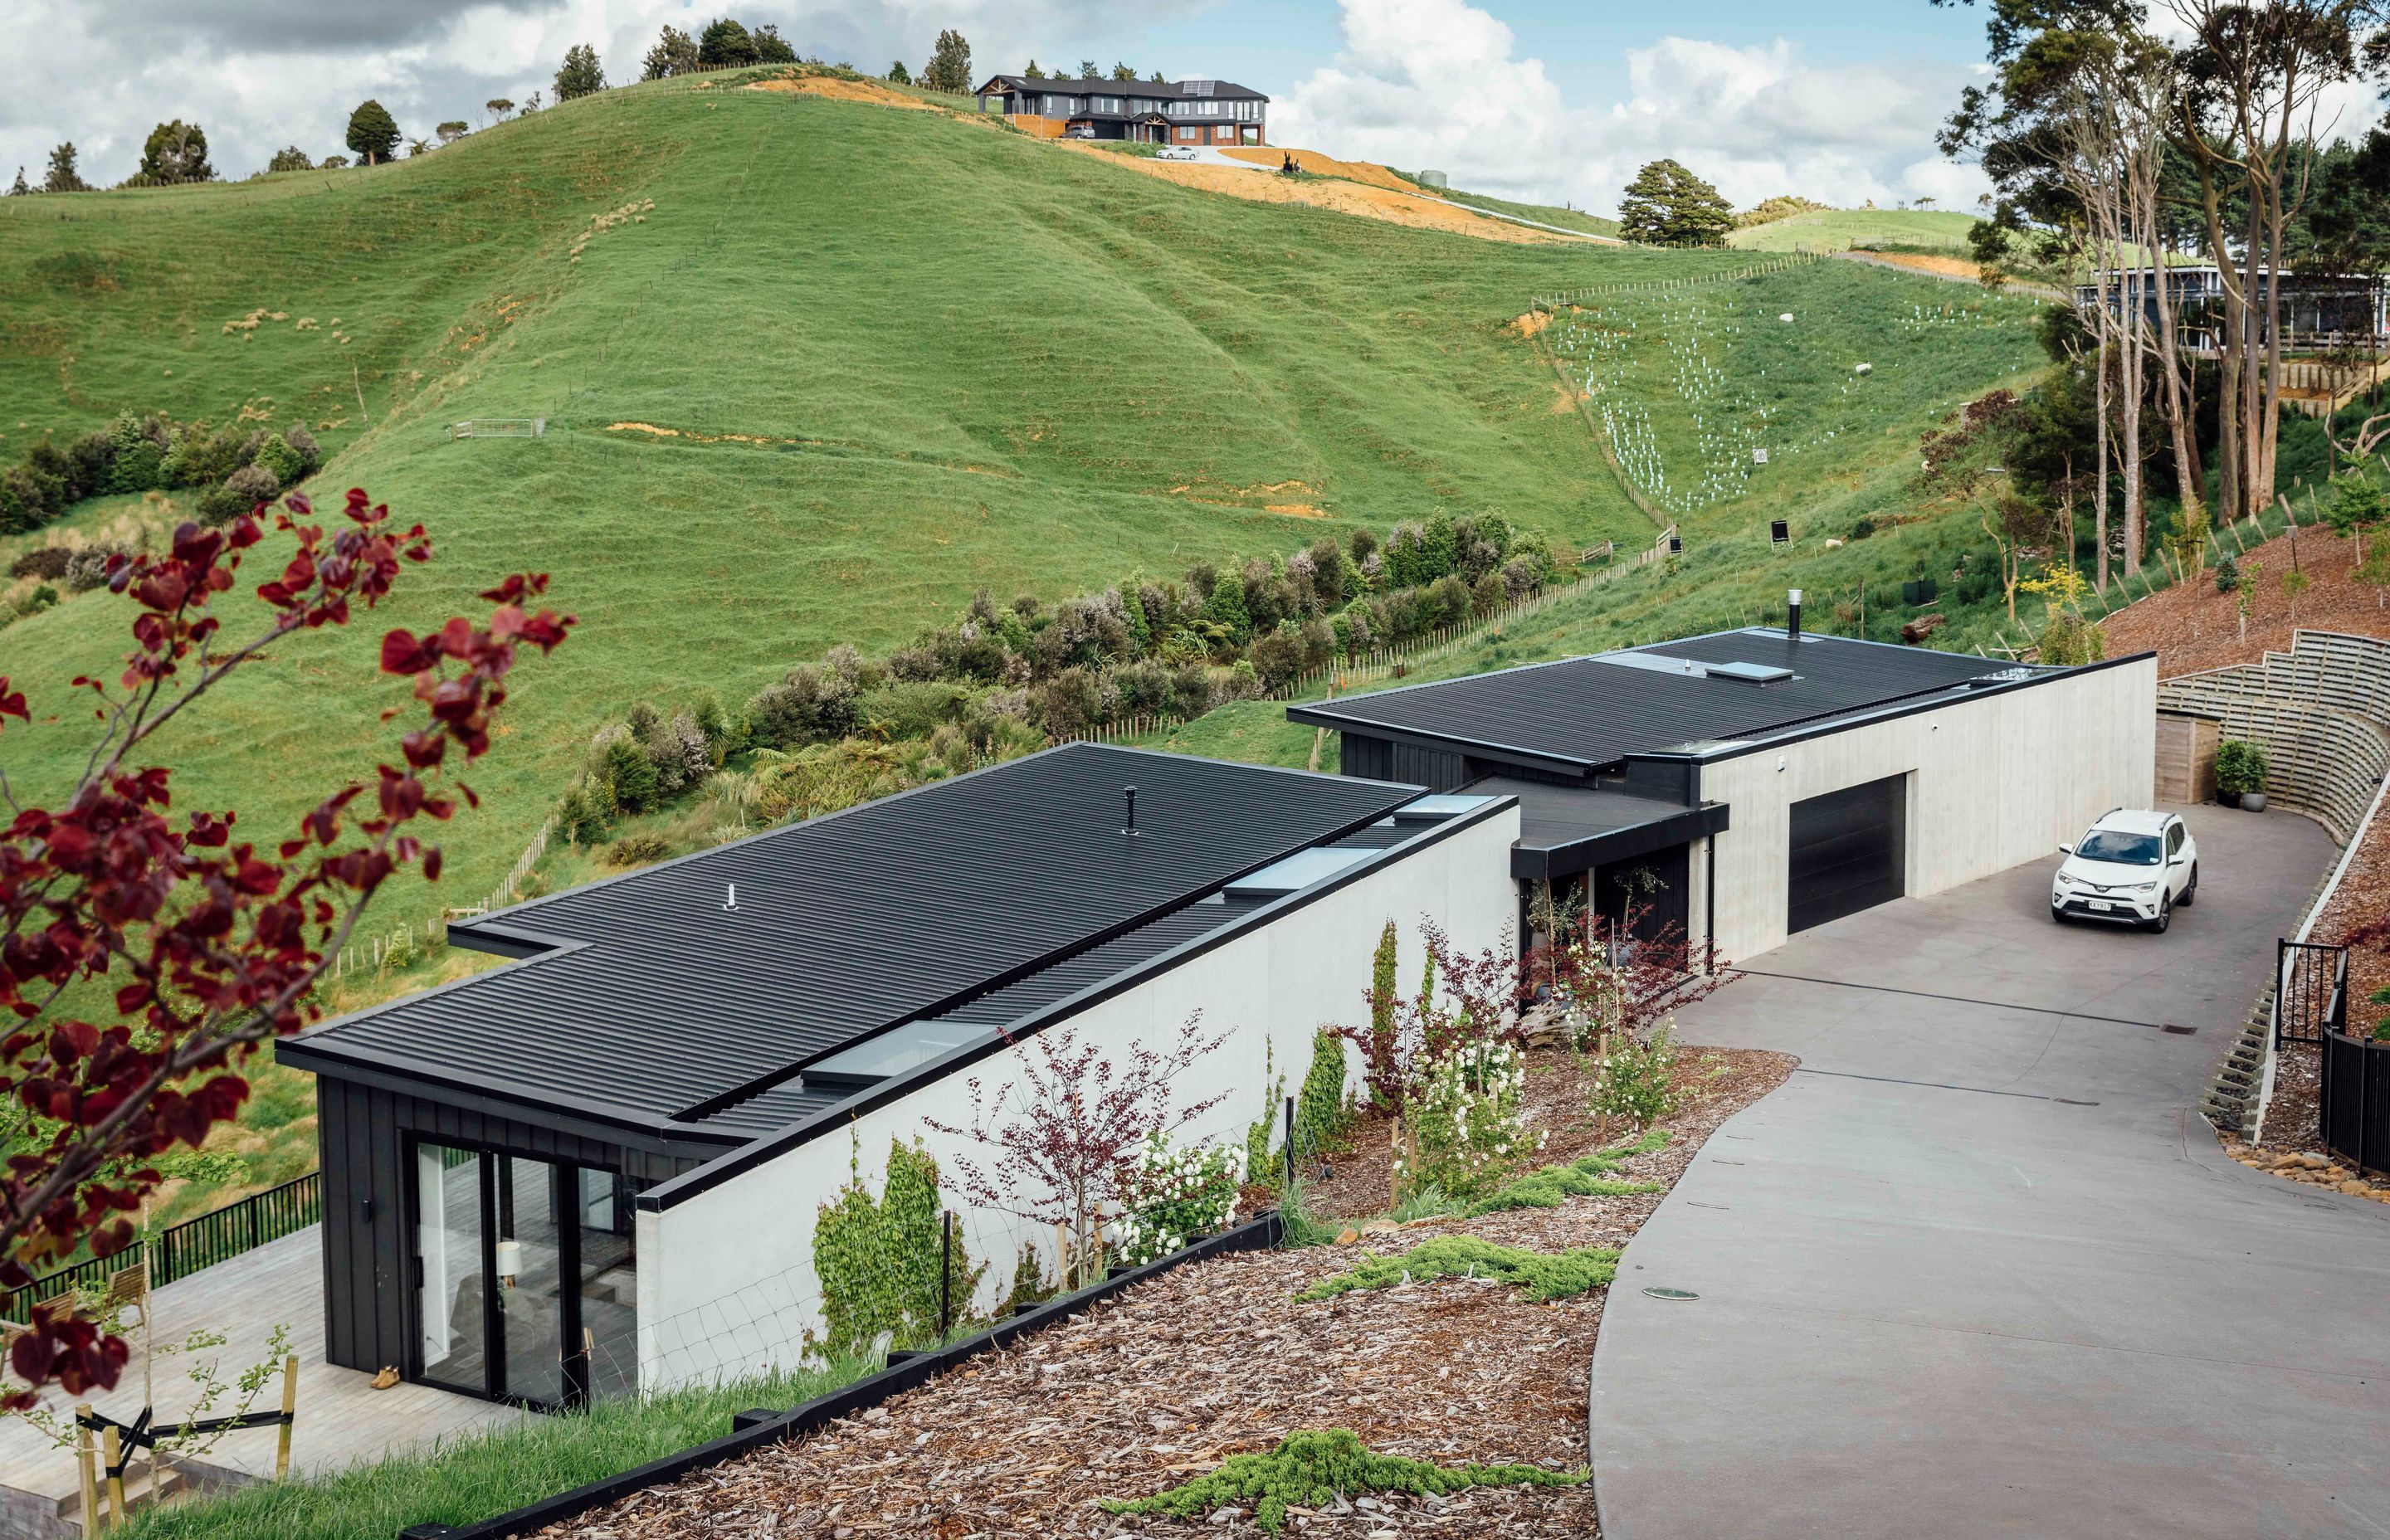 Robust materials including Colorsteel longrun roofing in 'Ebony' and a spine of concrete tilt panels anchor the dwelling to the hillside. The owners have planted Boston ivy to clamber over and soften the concrete wall.